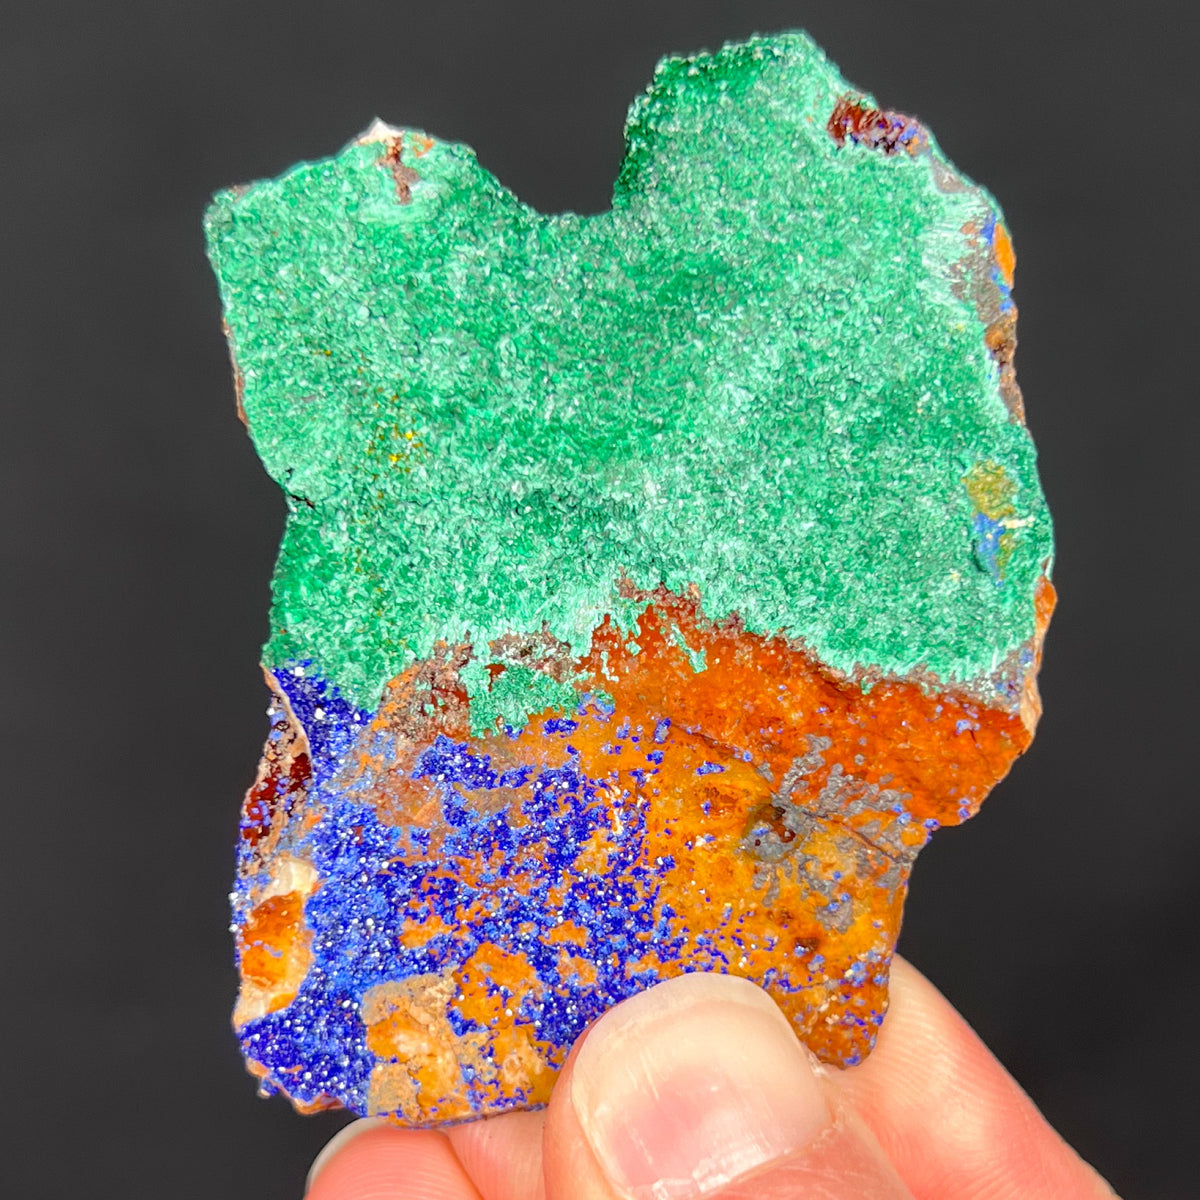 Fibrous Malachite with Azurite Crystals